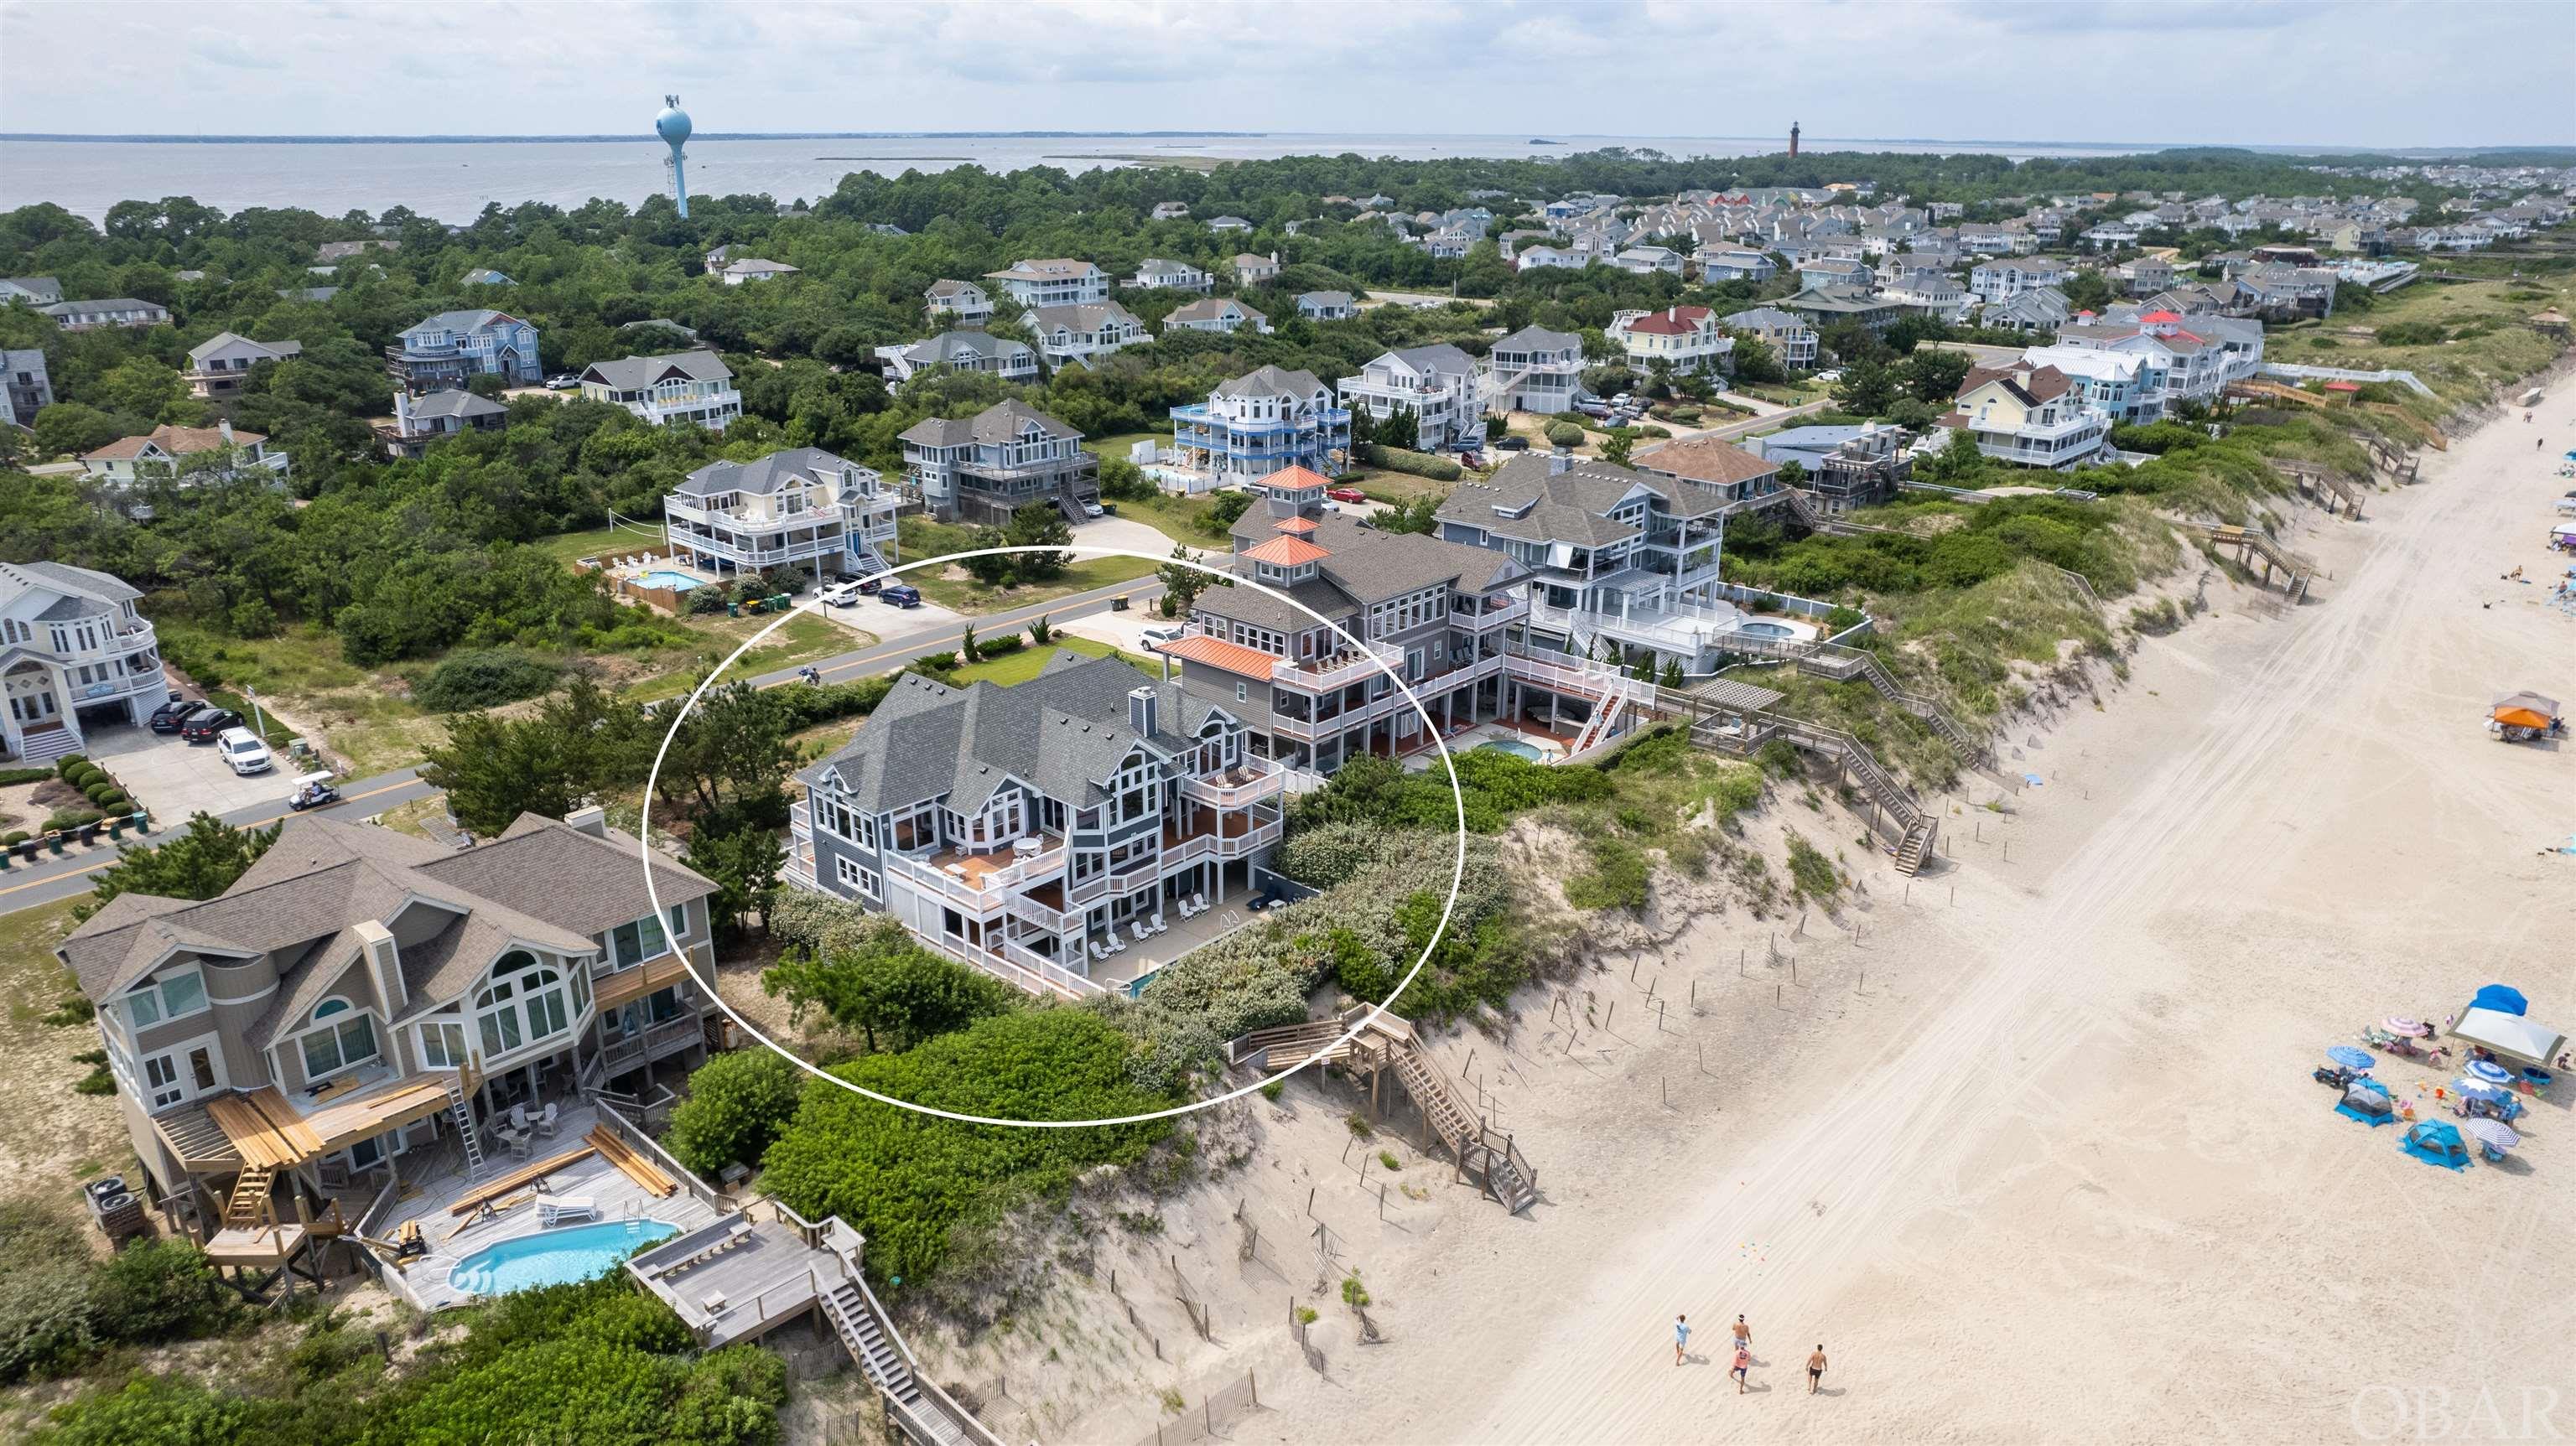 1083 Lighthouse Drive, Corolla, NC 27927, 6 Bedrooms Bedrooms, ,5 BathroomsBathrooms,Residential,For sale,Lighthouse Drive,123153